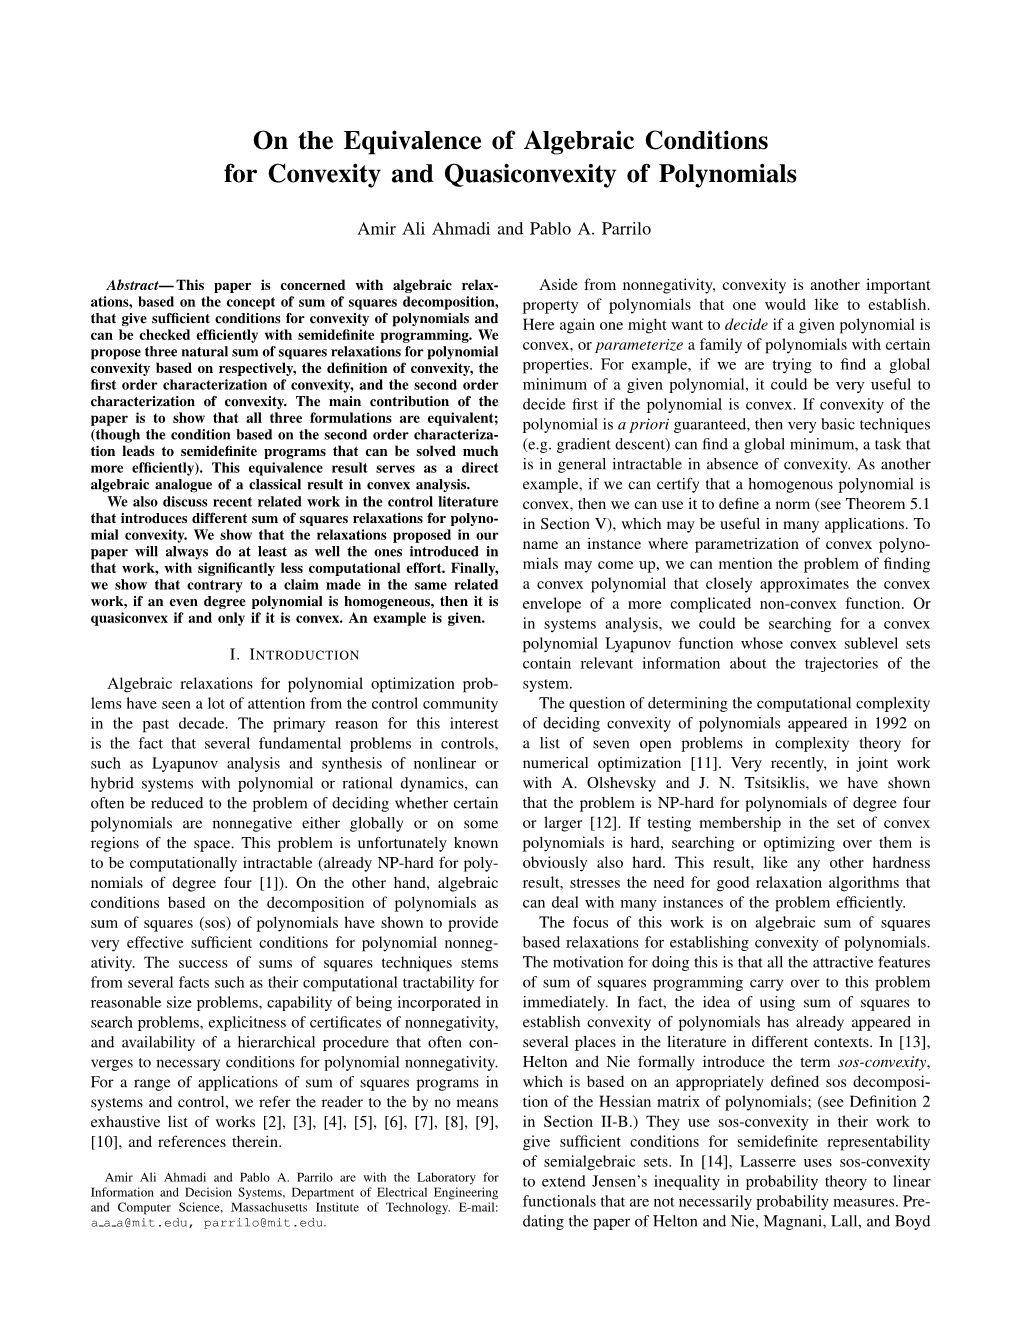 On the Equivalence of Algebraic Conditions for Convexity and Quasiconvexity of Polynomials